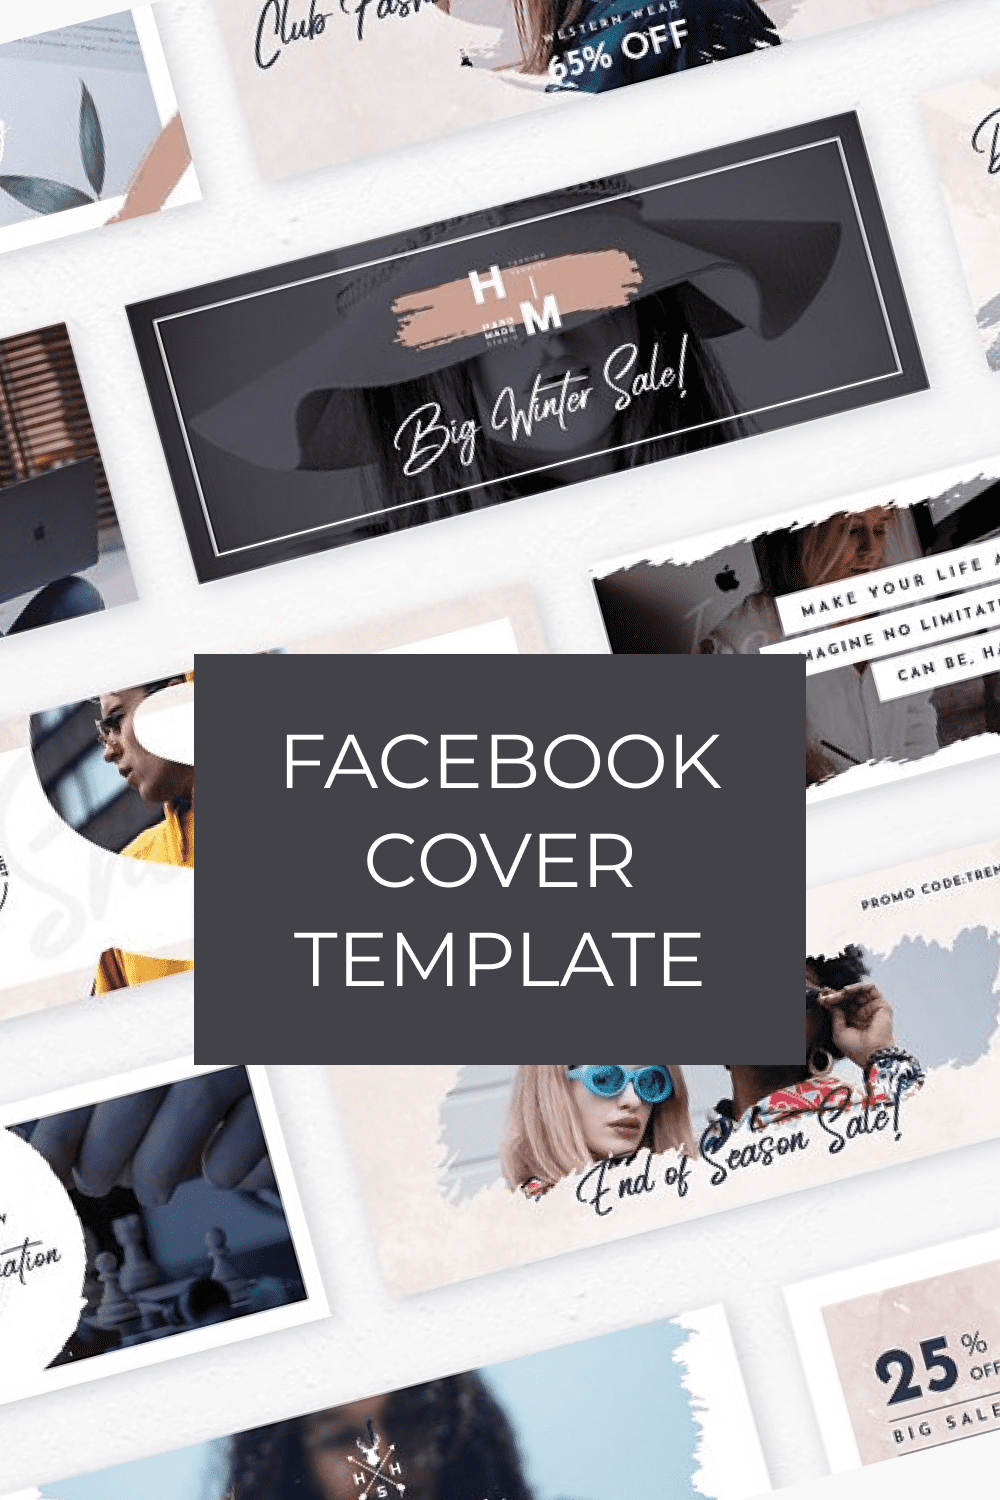 Facebook Cover Template - for Pinterest.